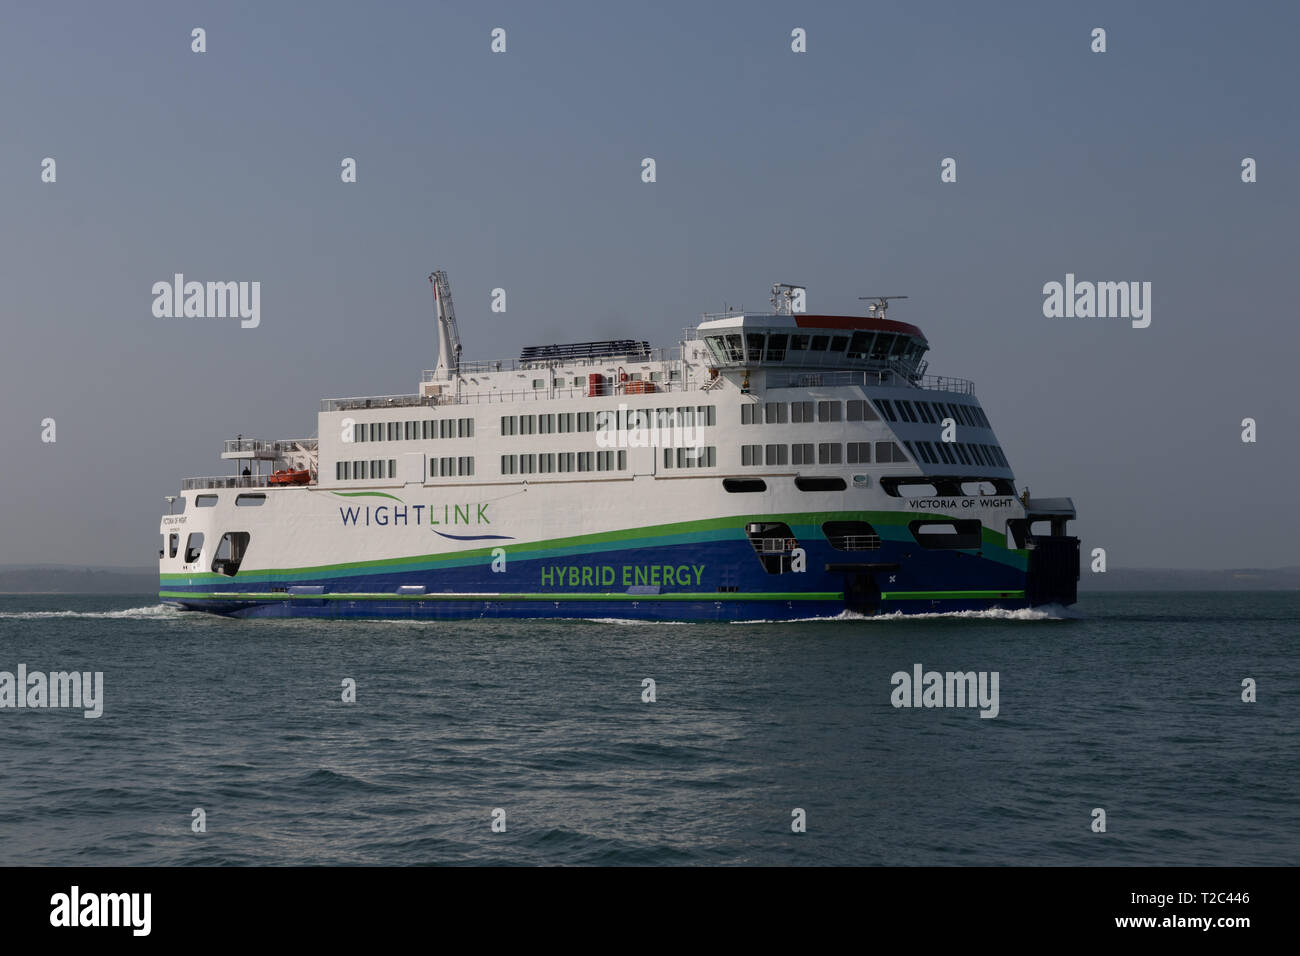 Newest Wightlink ferry the Victoria of Wight entering Portsmouth harbour Stock Photo